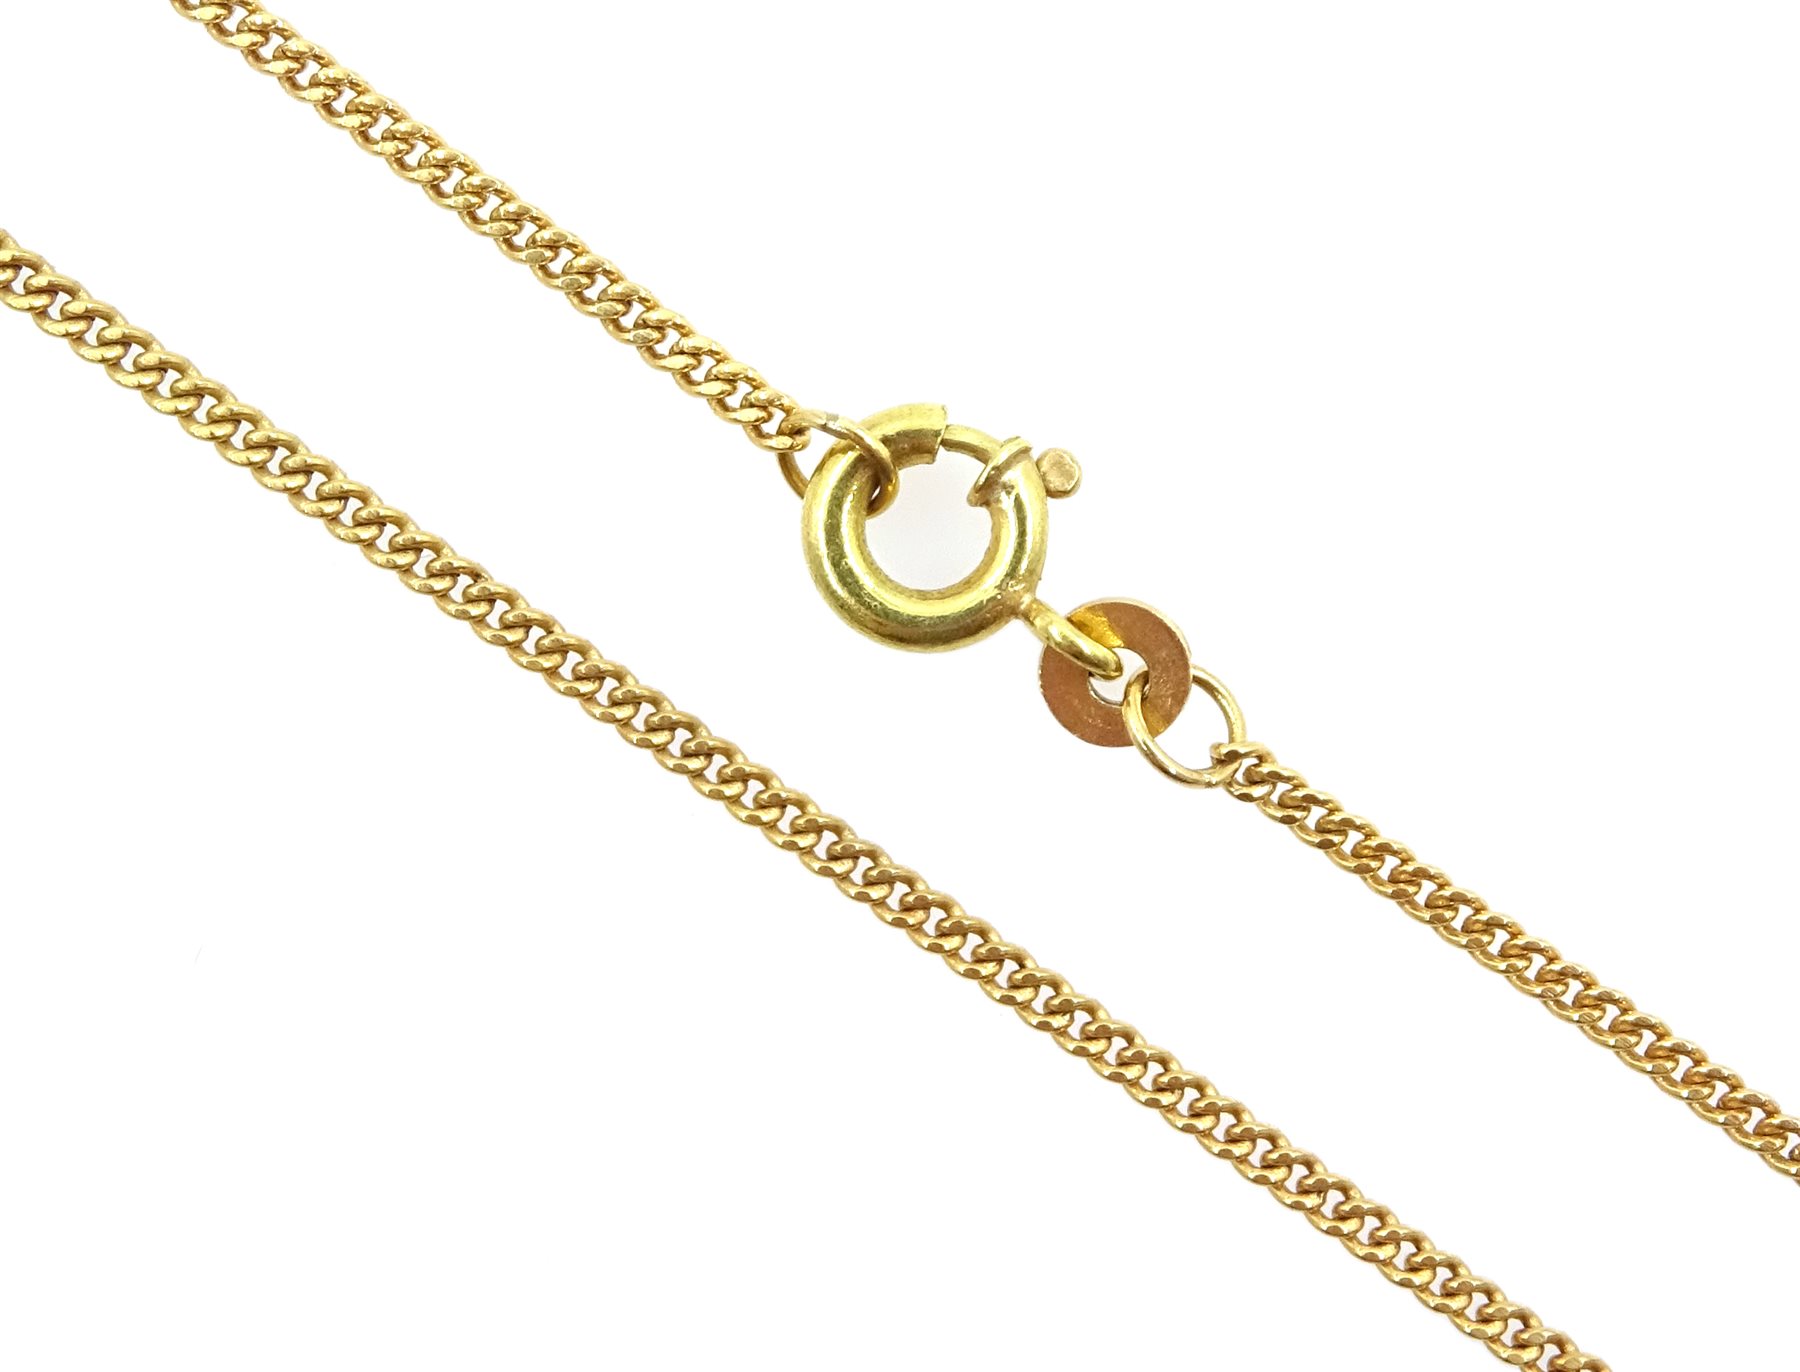 18ct gold chain necklace, stamped 750, approx 5gm - Image 2 of 2